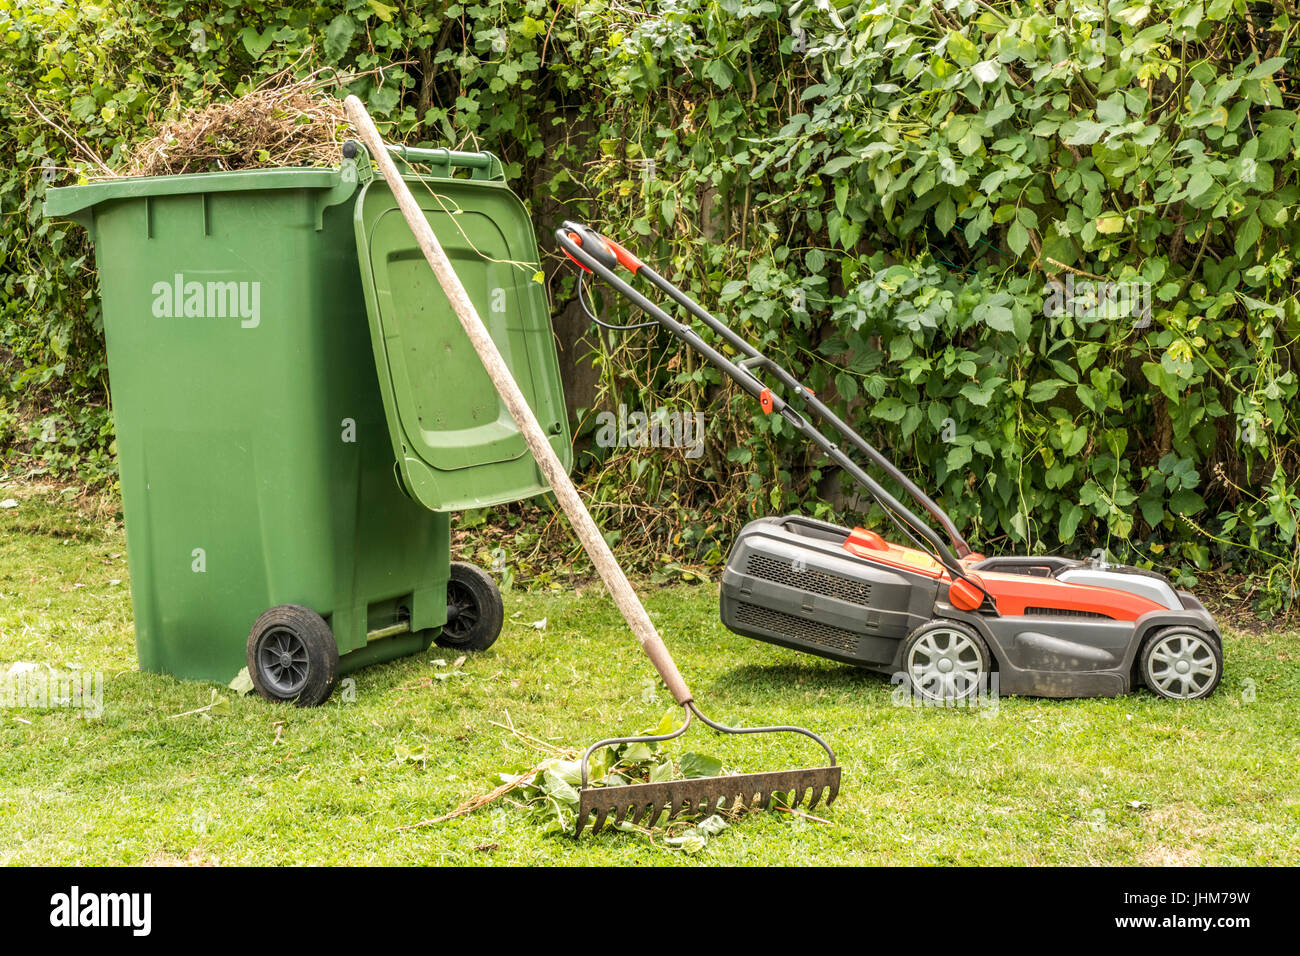 A lawn mower, a wheely bin full of cuttings and a rake, in a garden in England, UK. Stock Photo